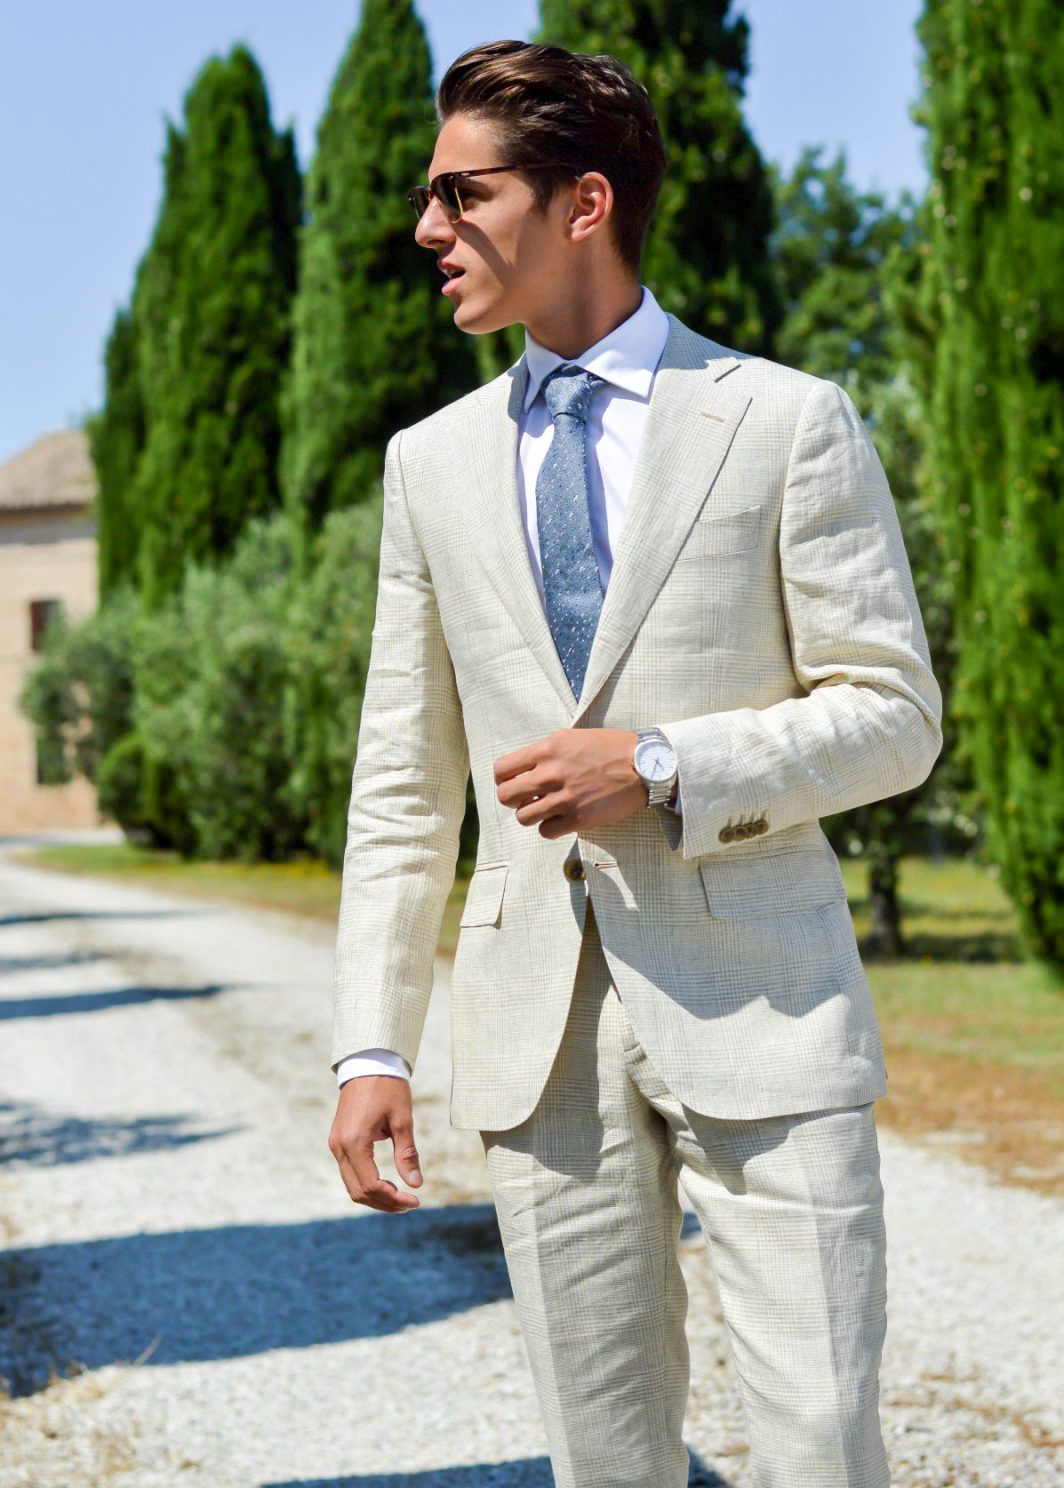 beige suit and white shirt color combinations